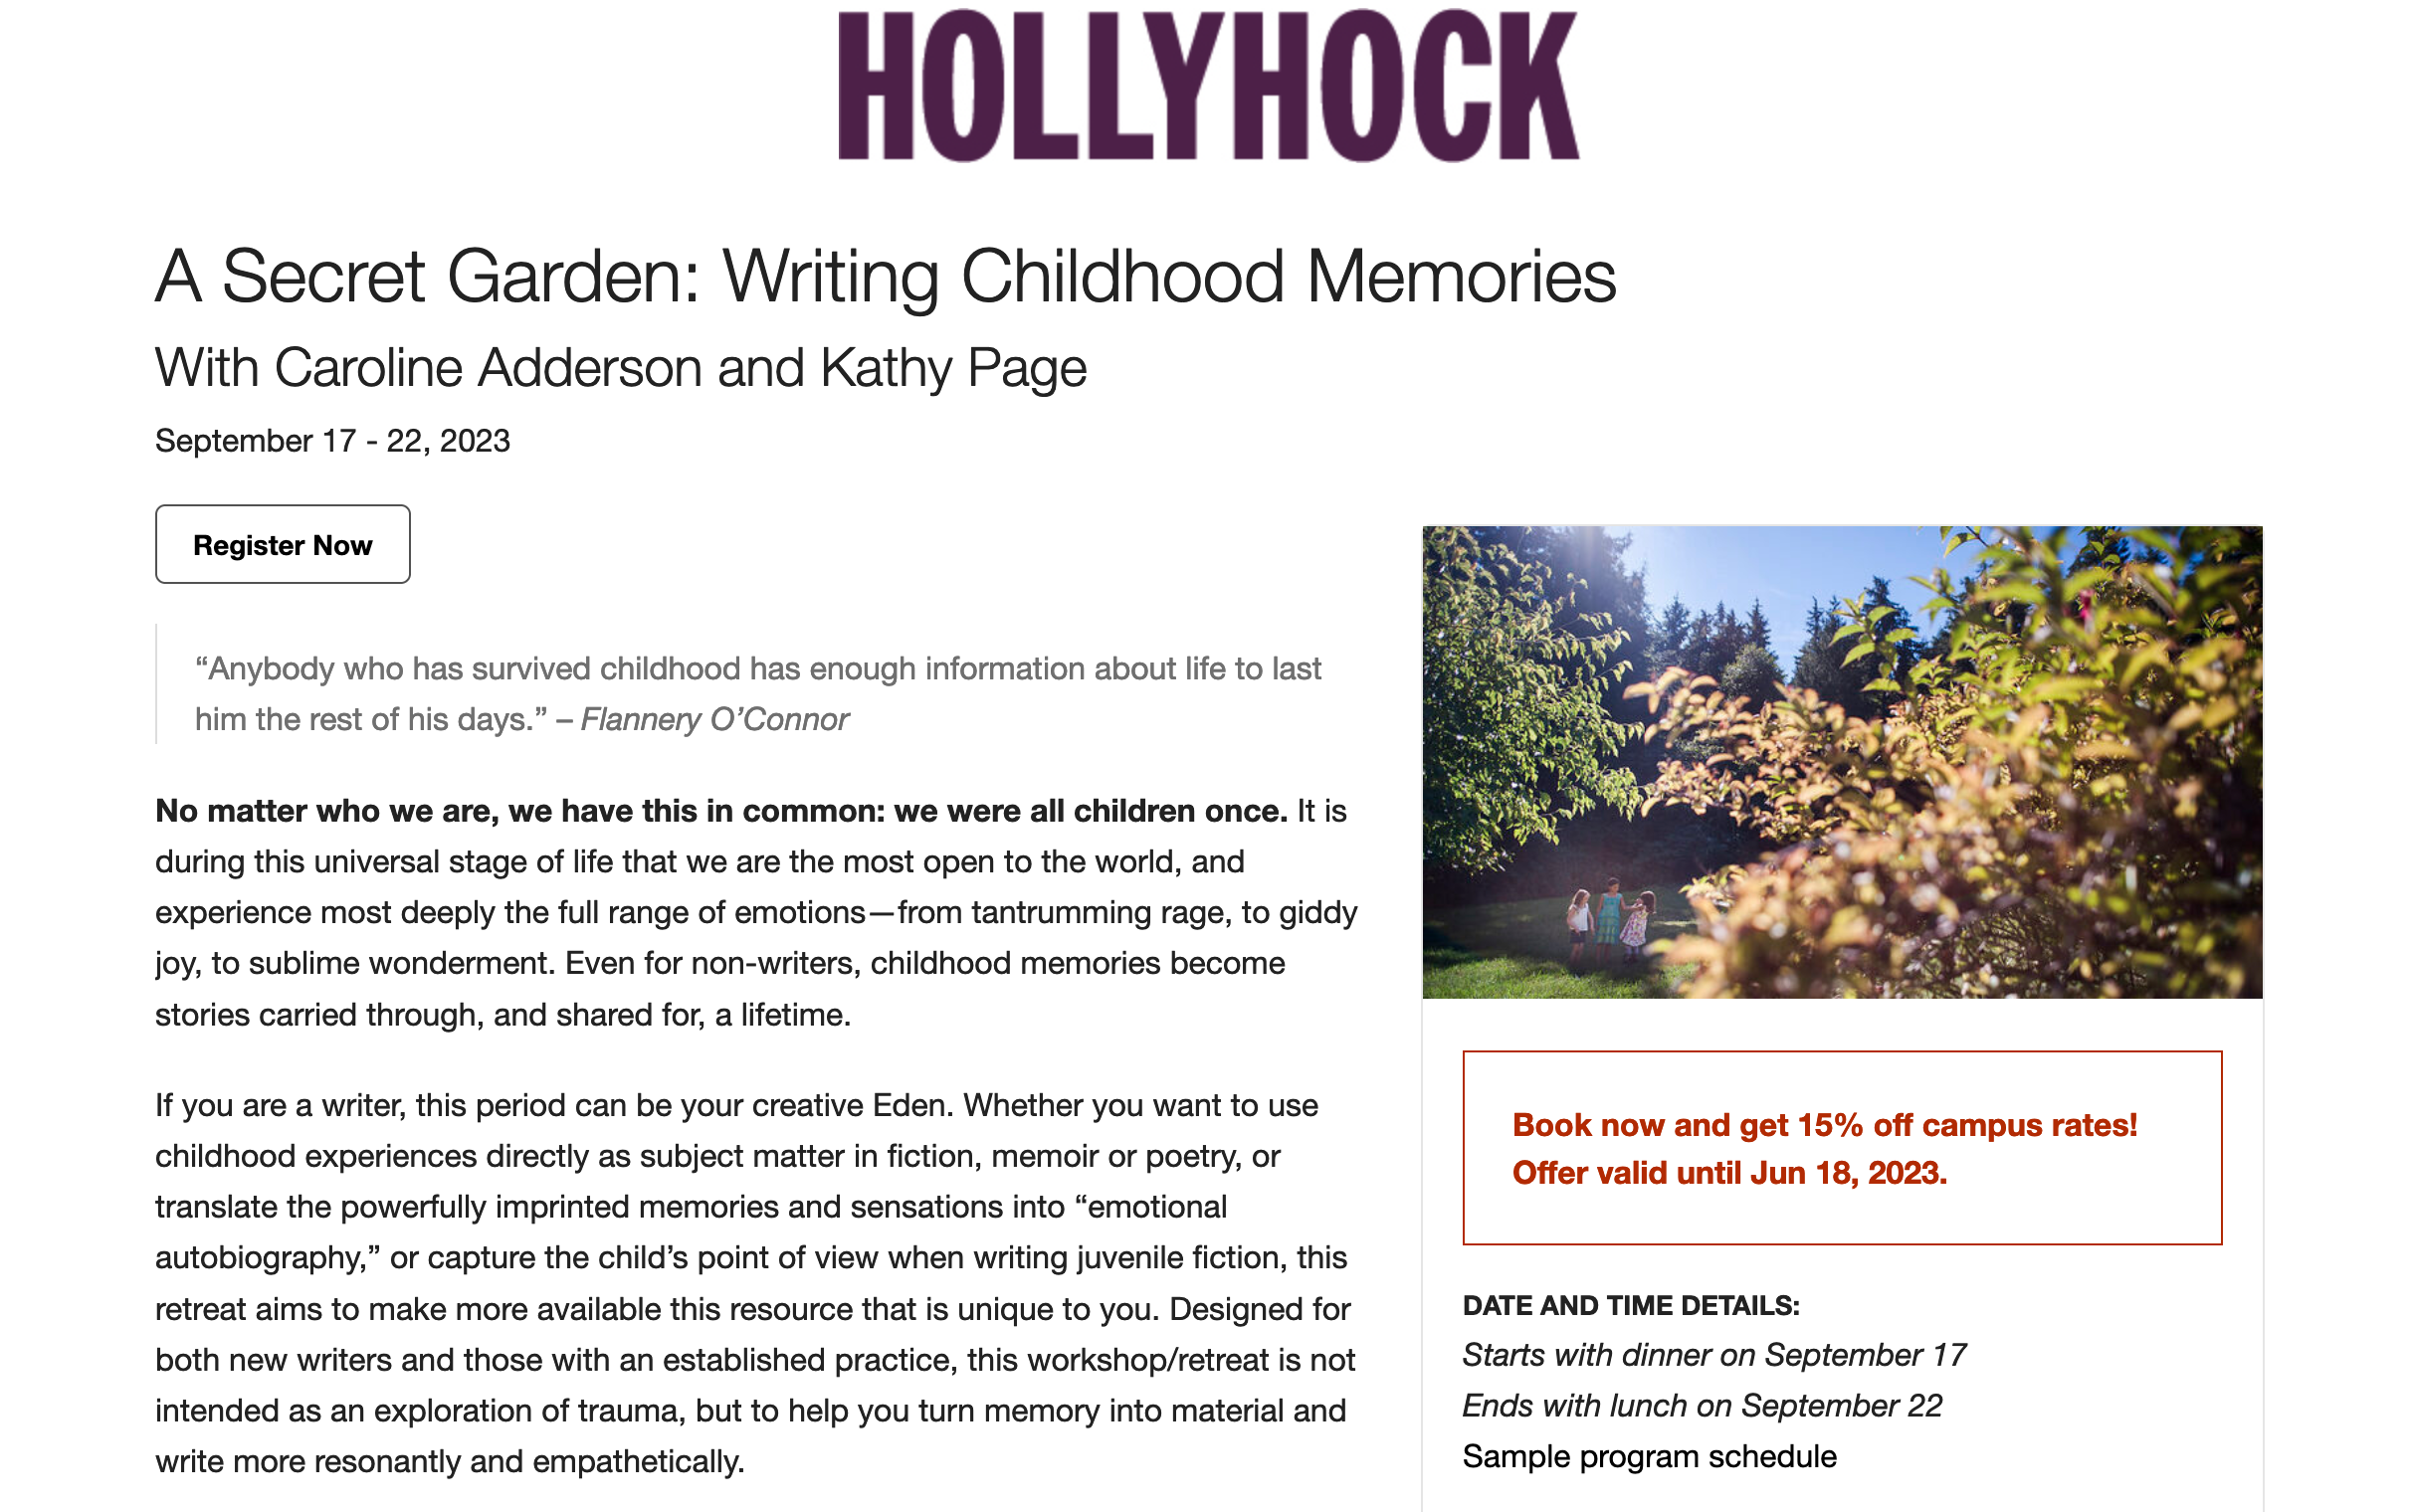 A Secret Garden: Writing Childhood Memories with Kathy Page and Caroline Adderson